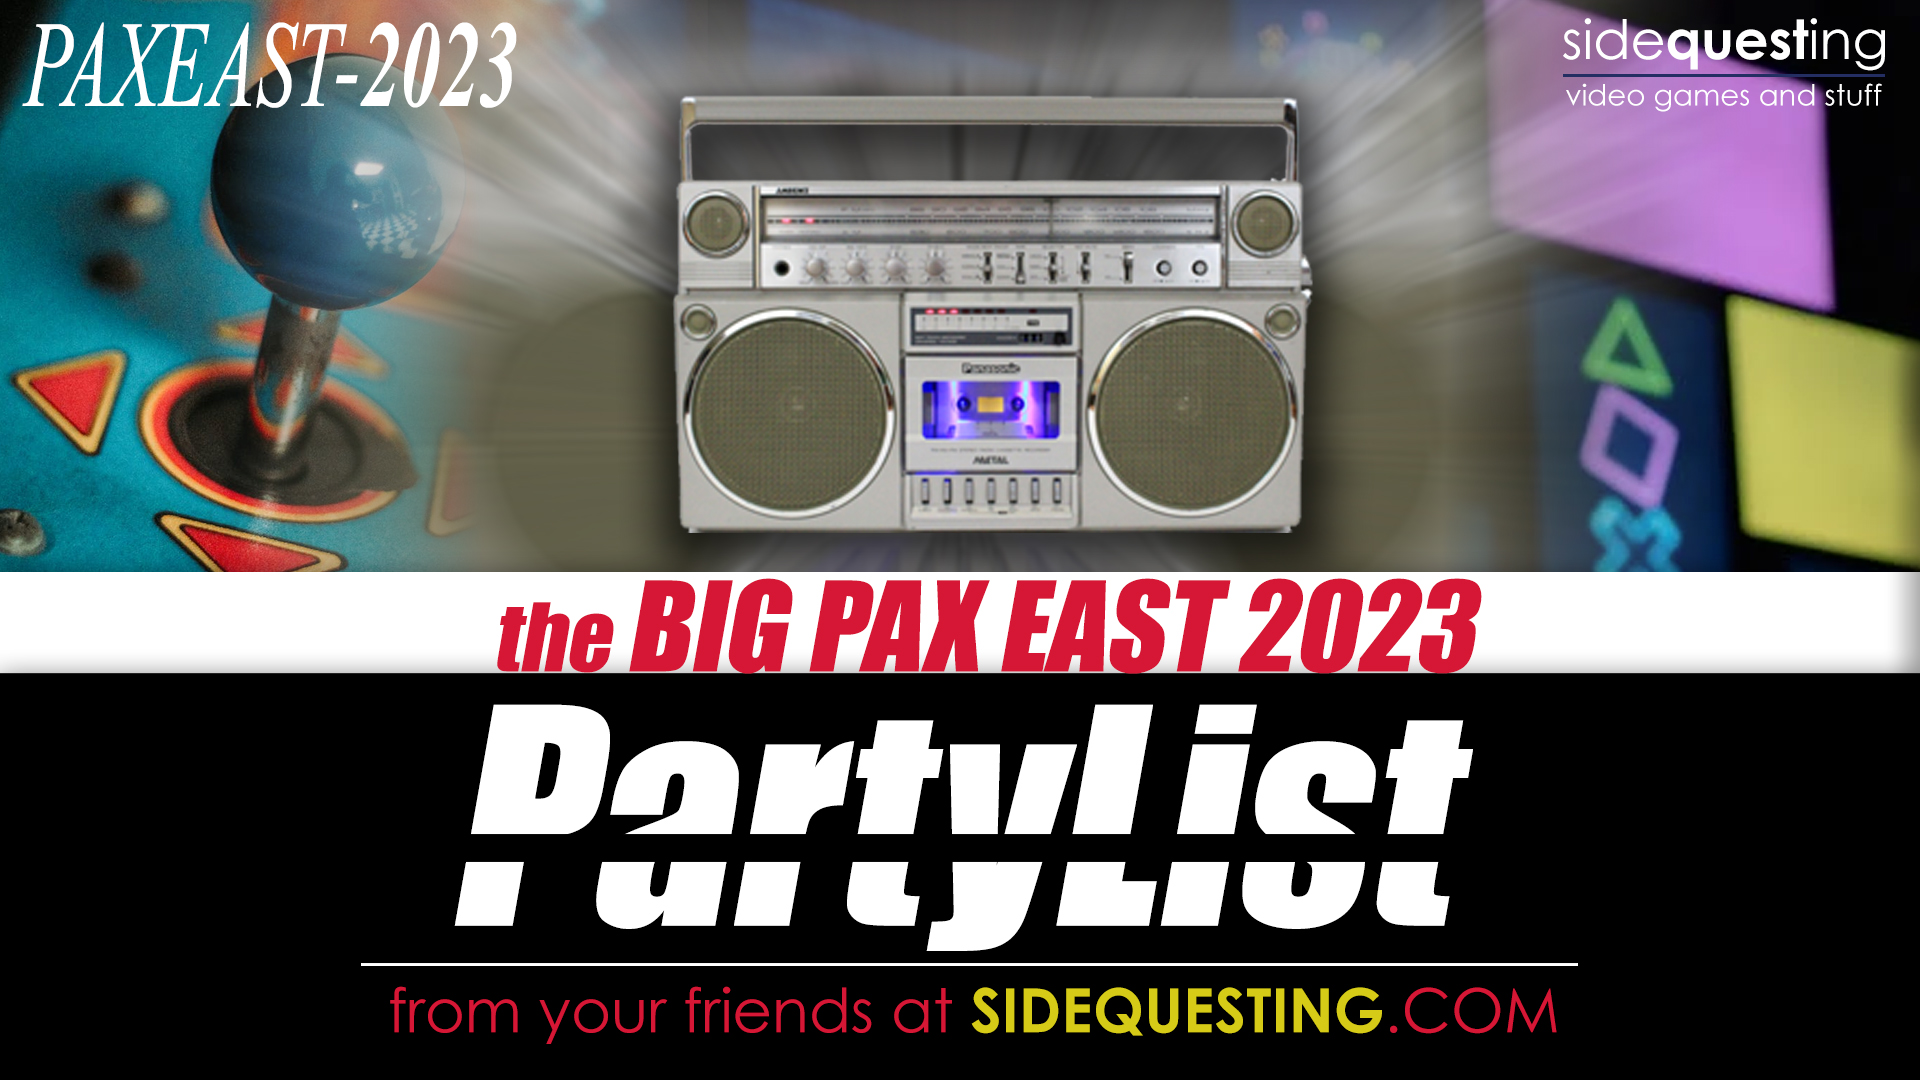 Happy PAX East 2023 week — don’t forget our ULTIMATE Party list!